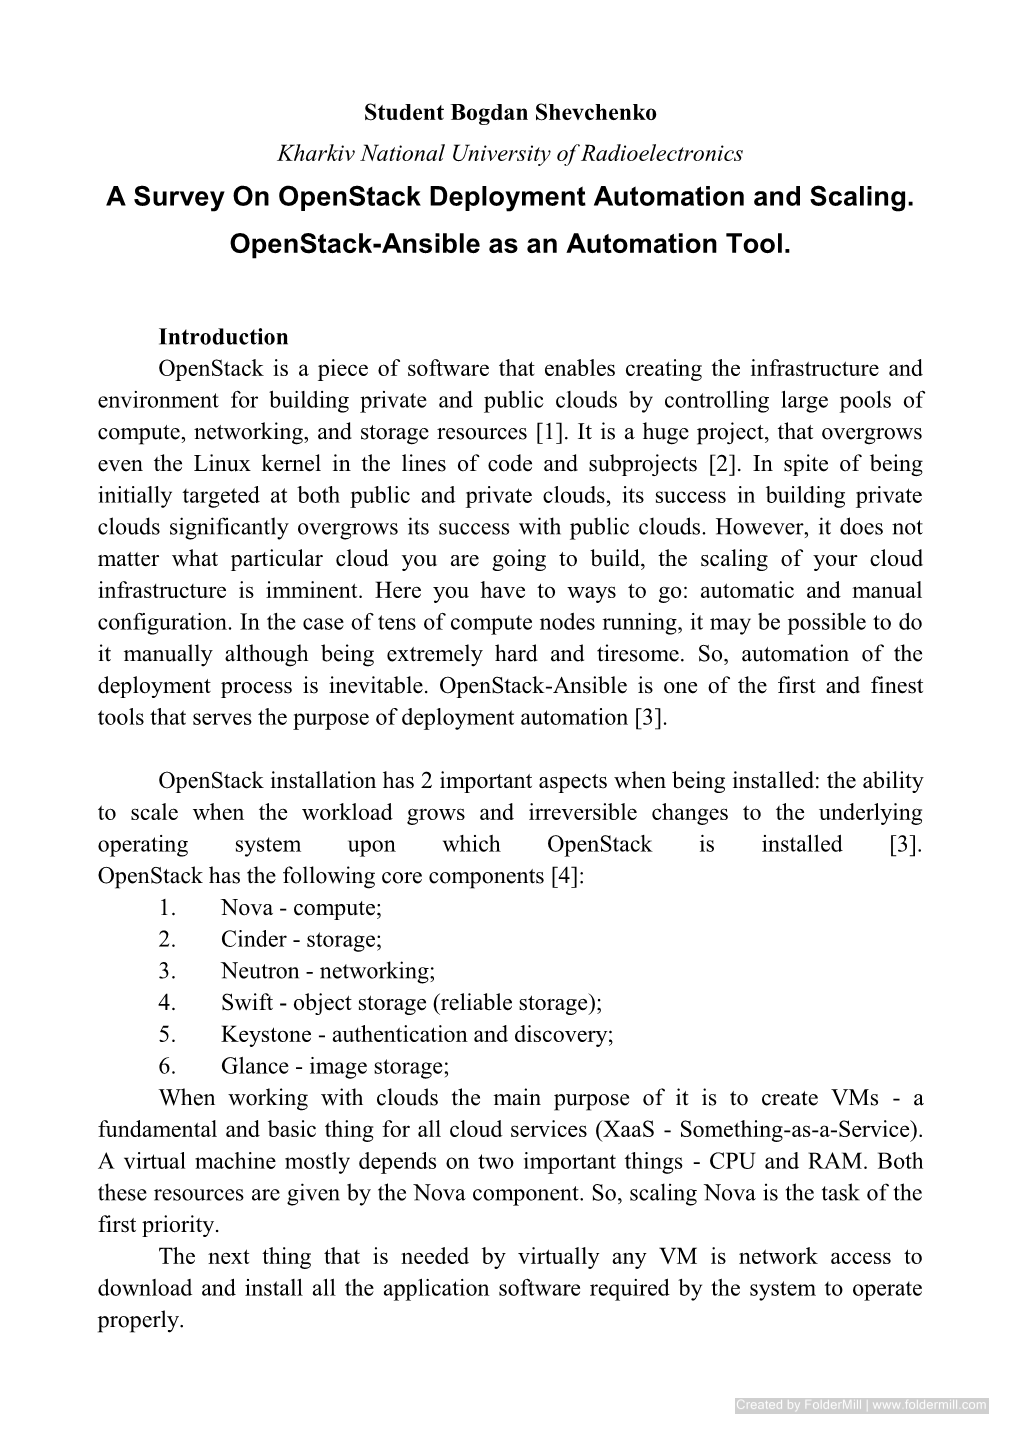 A Survey on Openstack Deployment Automation and Scaling